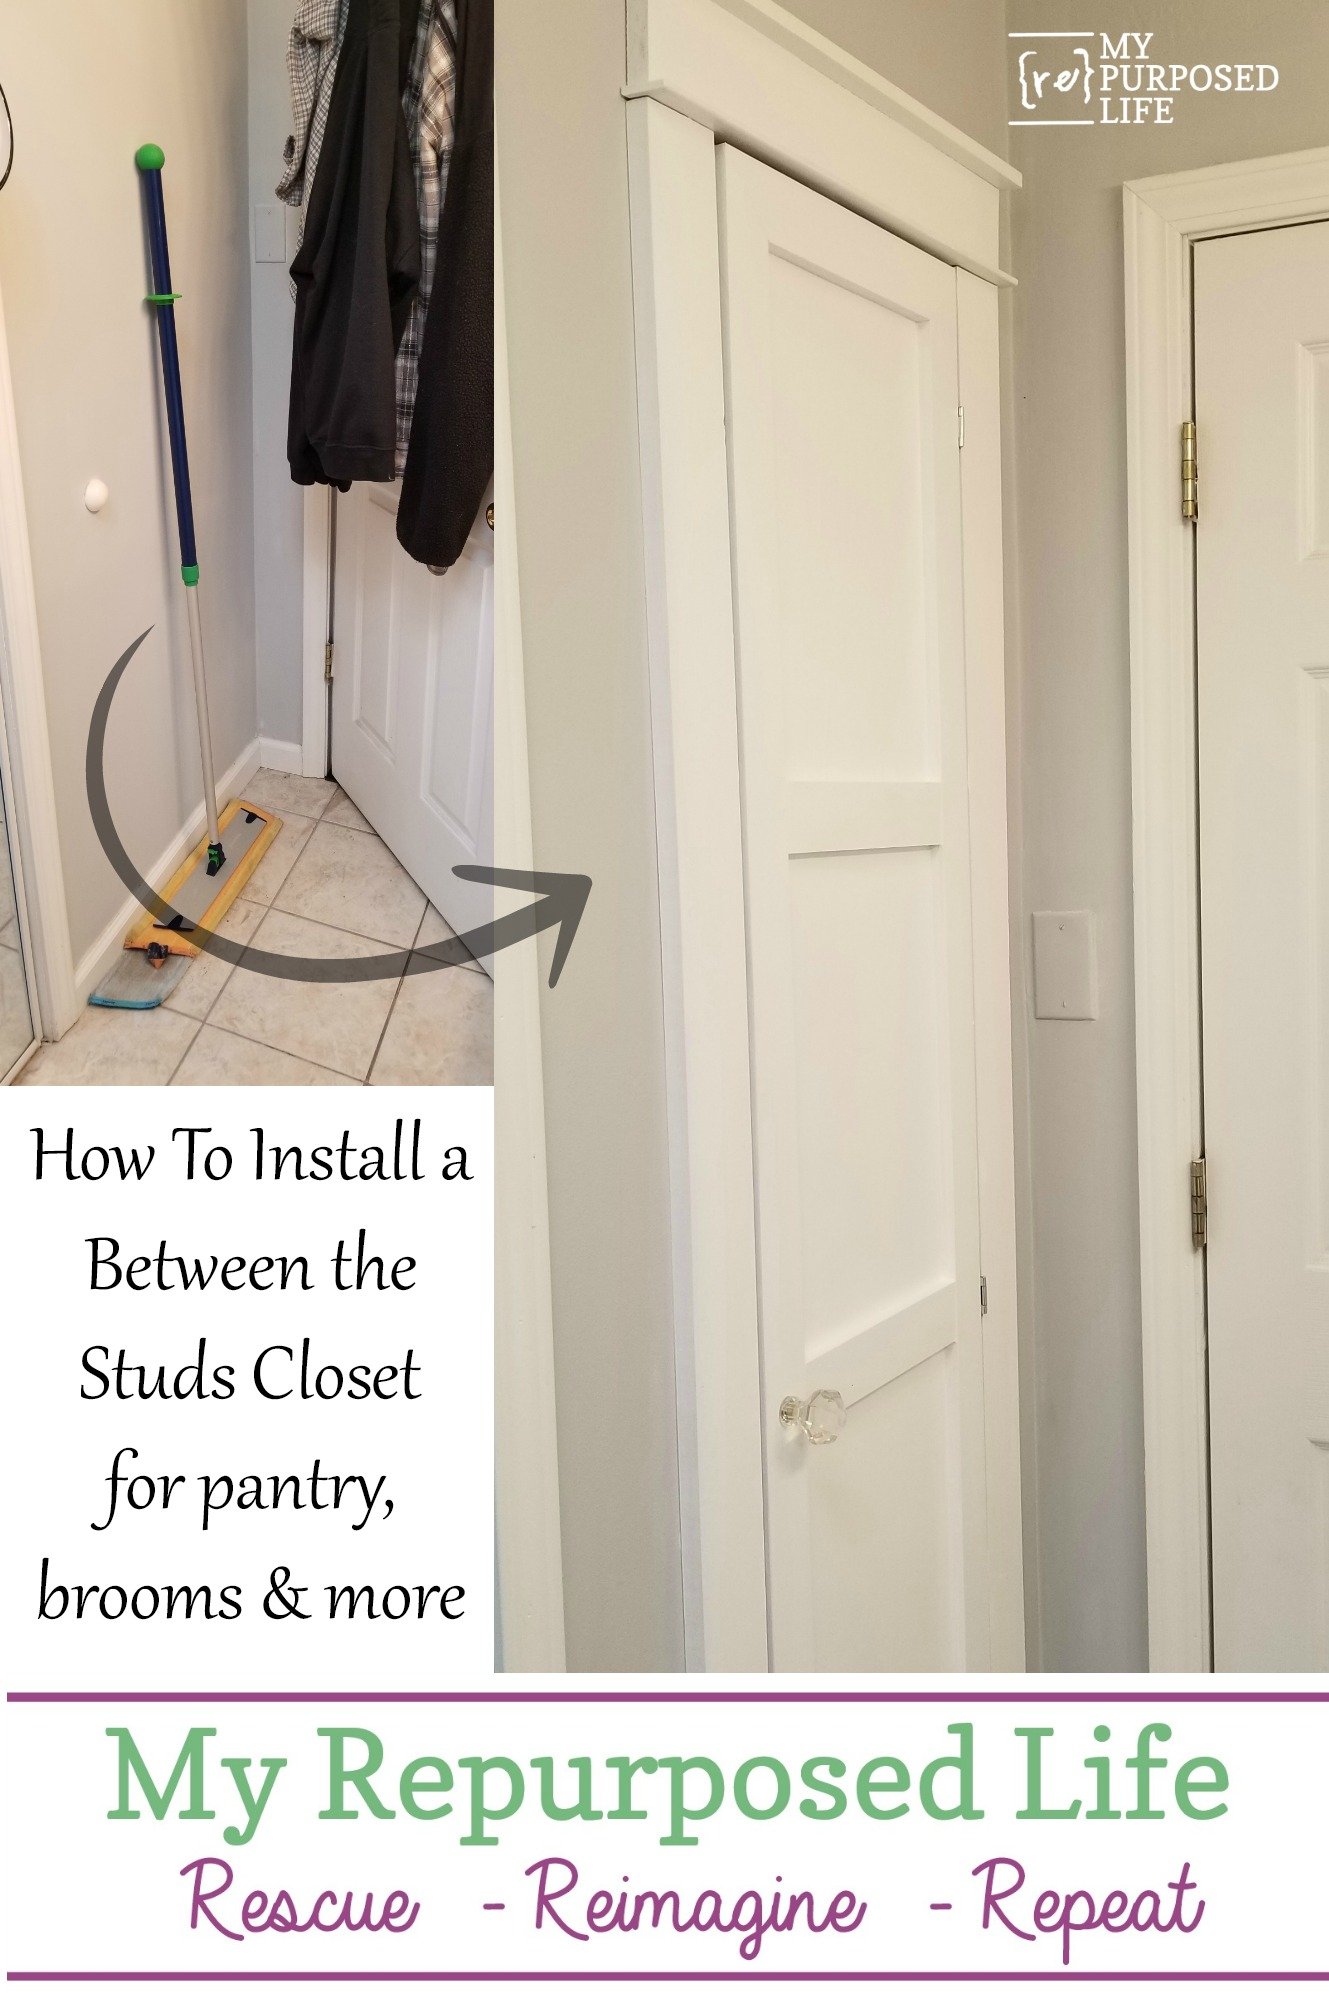 Building a closet between the studs is a great option for the kitchen or bathroom.This diy storage closet is perfect for storing tall items. #MyRepurposedLife #diy #closet #organization via @repurposedlife